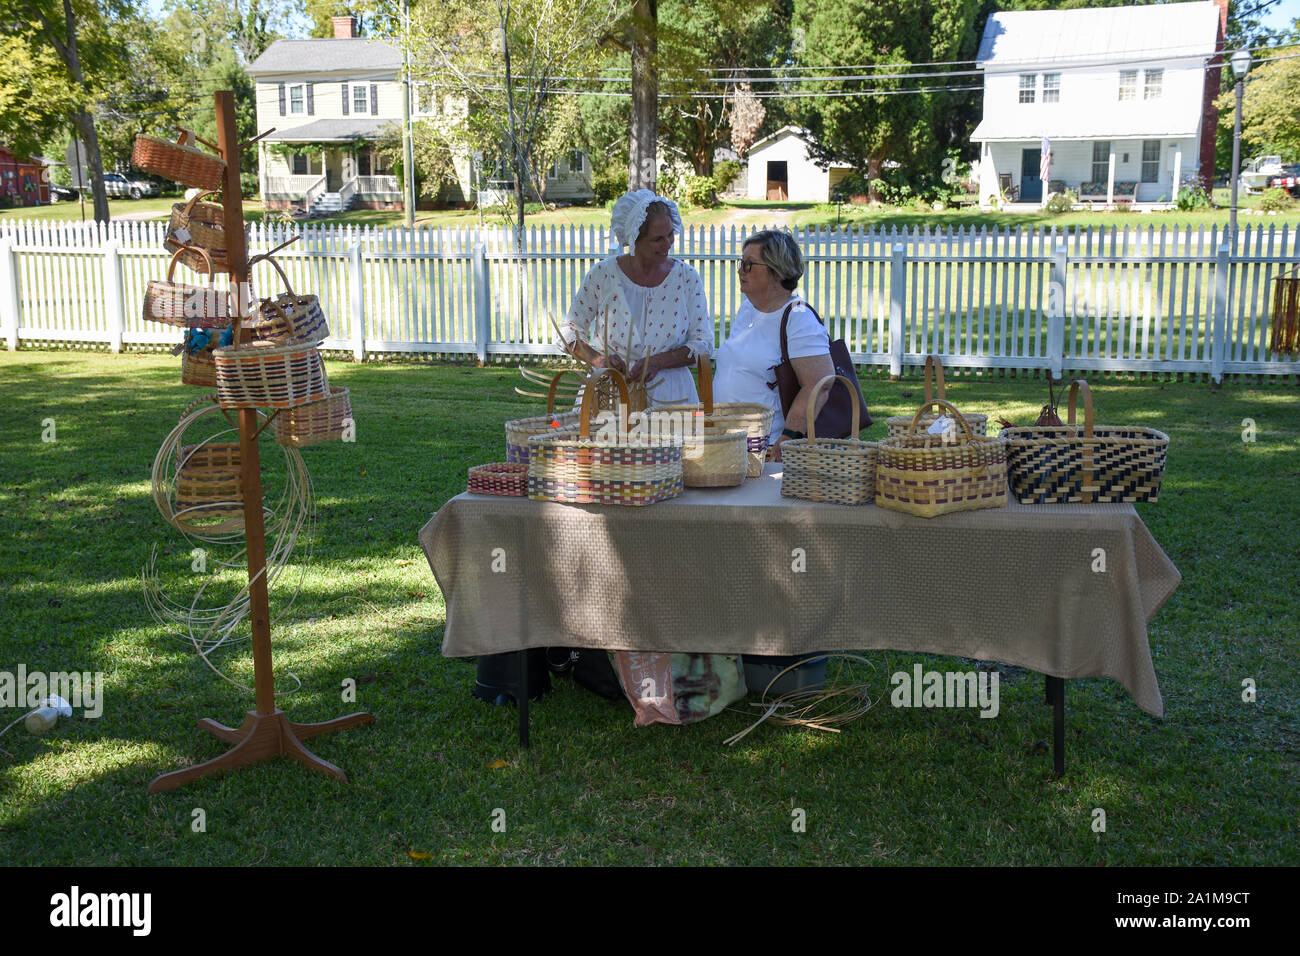 A demonstration of basket making in colonial times. Stock Photo